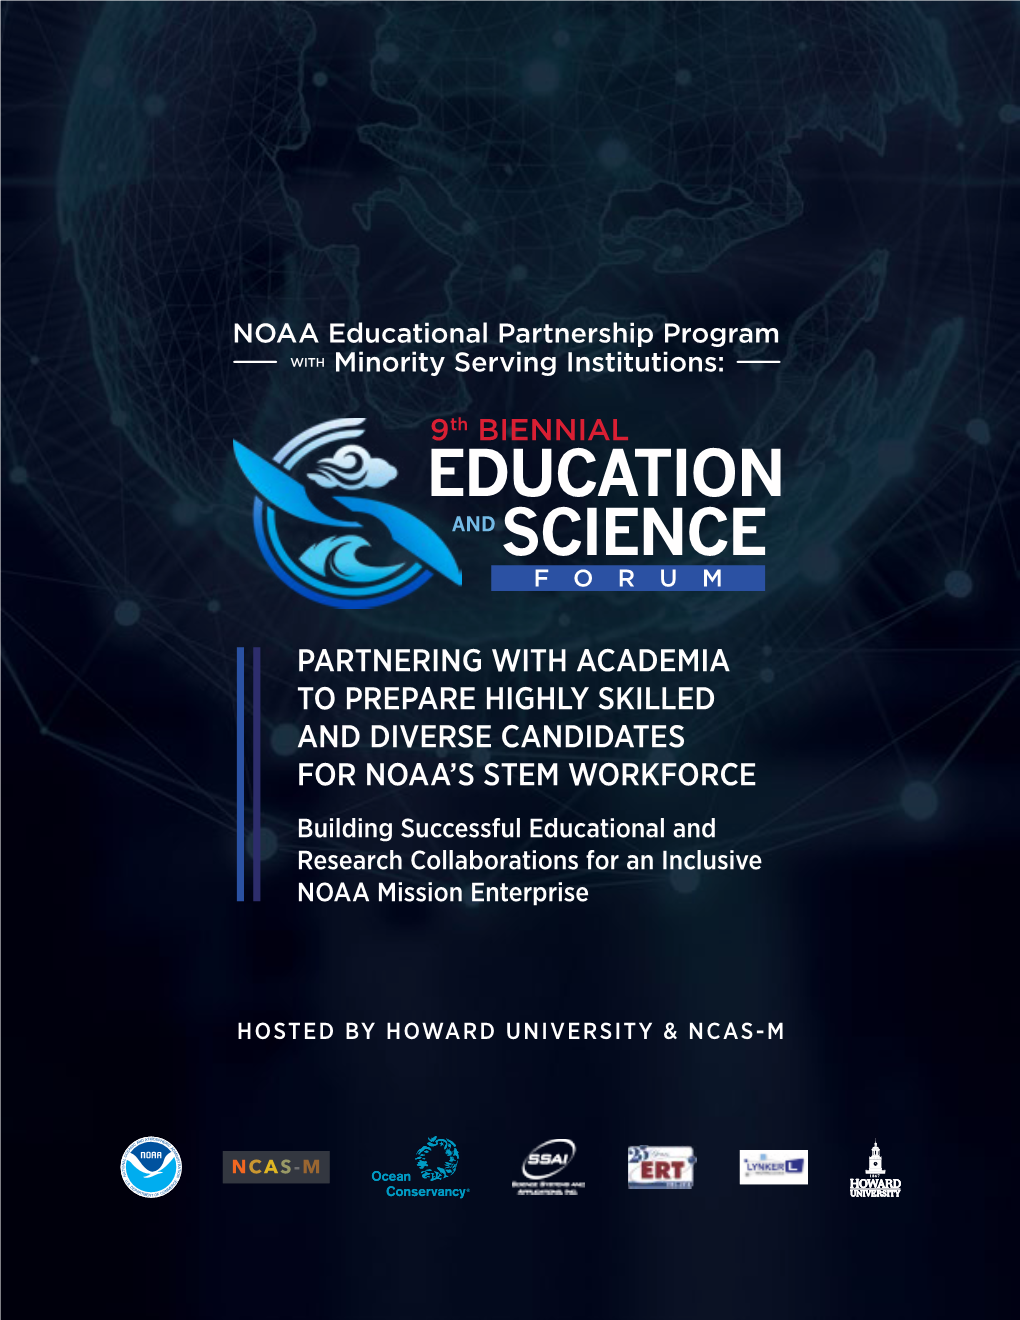 Partnering with Academia to Prepare Highly Skilled and Diverse Candidates for Noaa's Stem Workforce